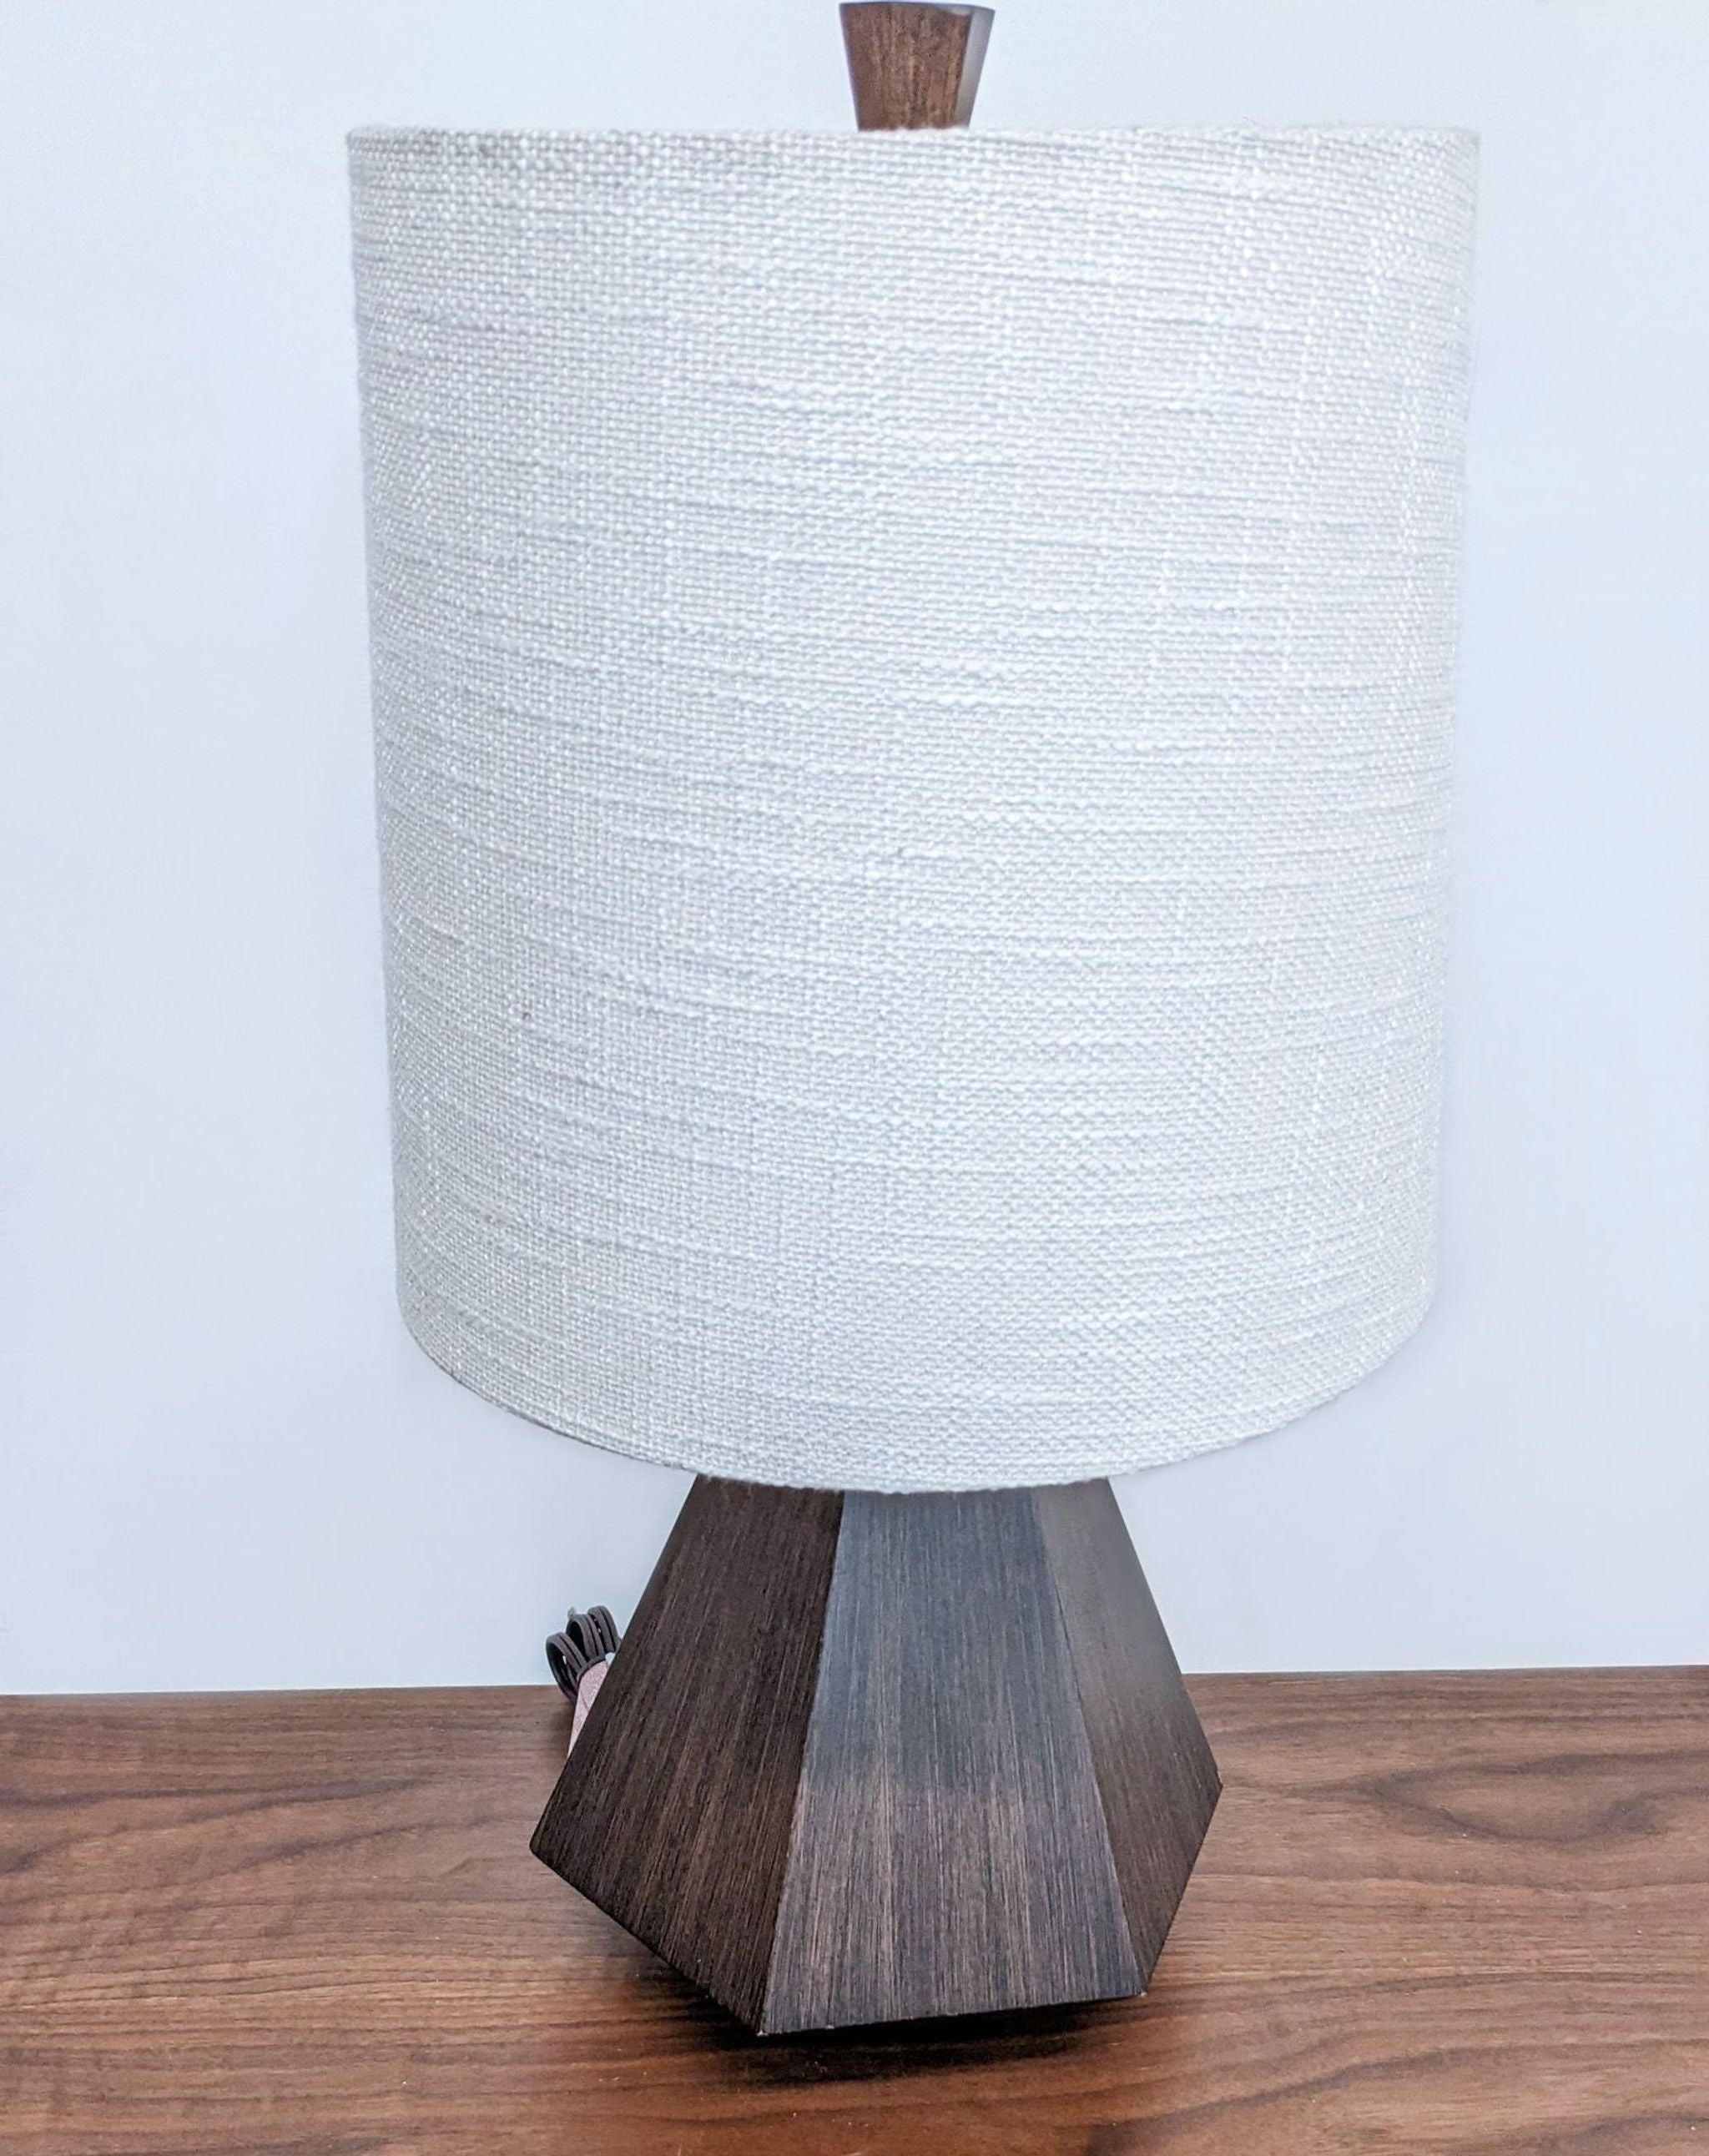 Reperch brand table lamp with white fabric shade and angular wooden base on a wooden table.